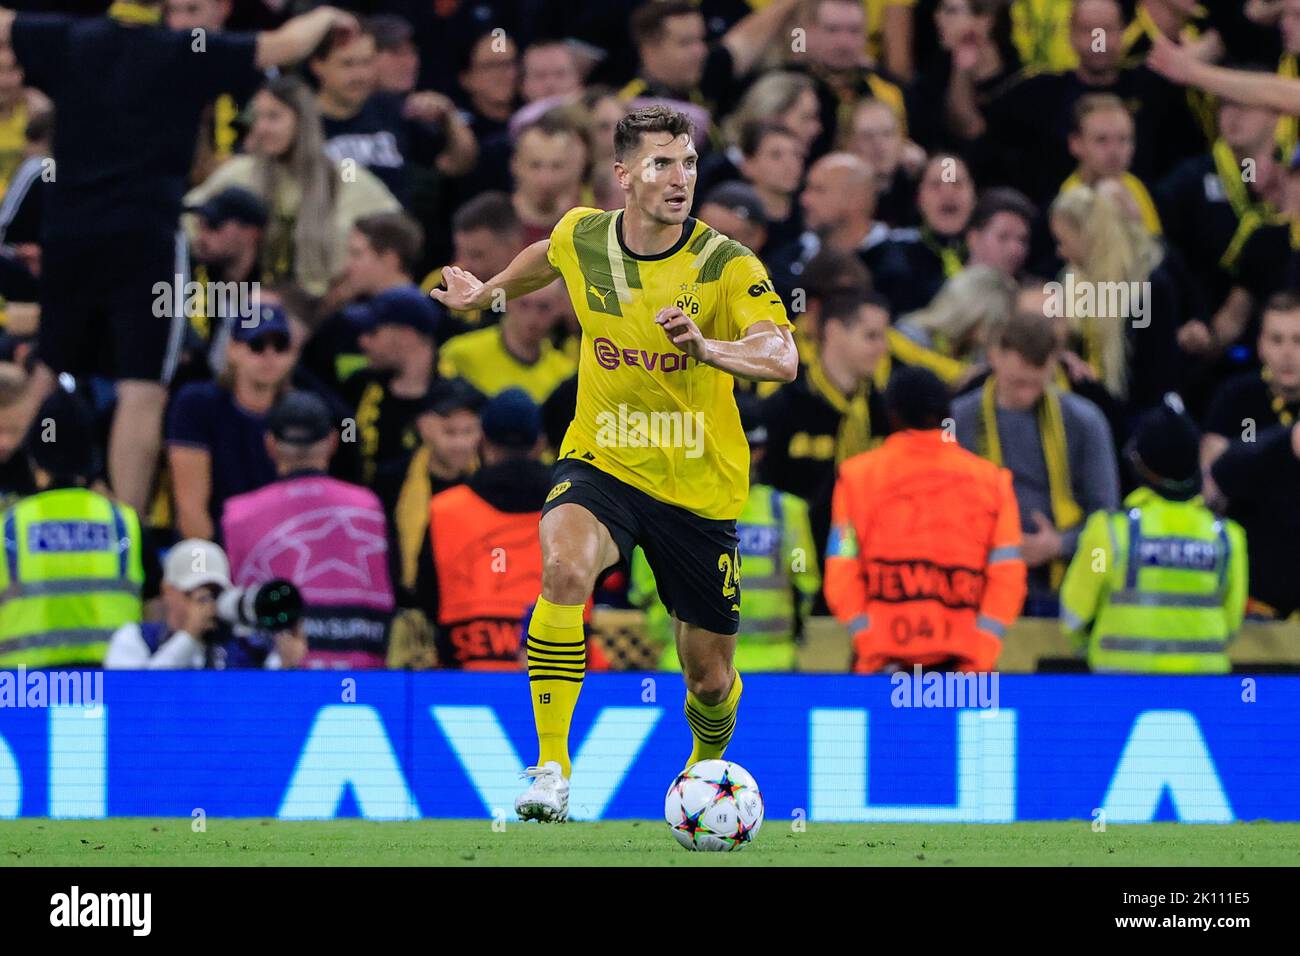 Manchester, UK. 14th Sep, 2022. Thomas Meunier #24 of Borussia Dortmund breaks with the ball during the UEFA Champions League match Manchester City vs Borussia Dortmund at Etihad Stadium, Manchester, United Kingdom, 14th September 2022 (Photo by Conor Molloy/News Images) Credit: News Images LTD/Alamy Live News Stock Photo